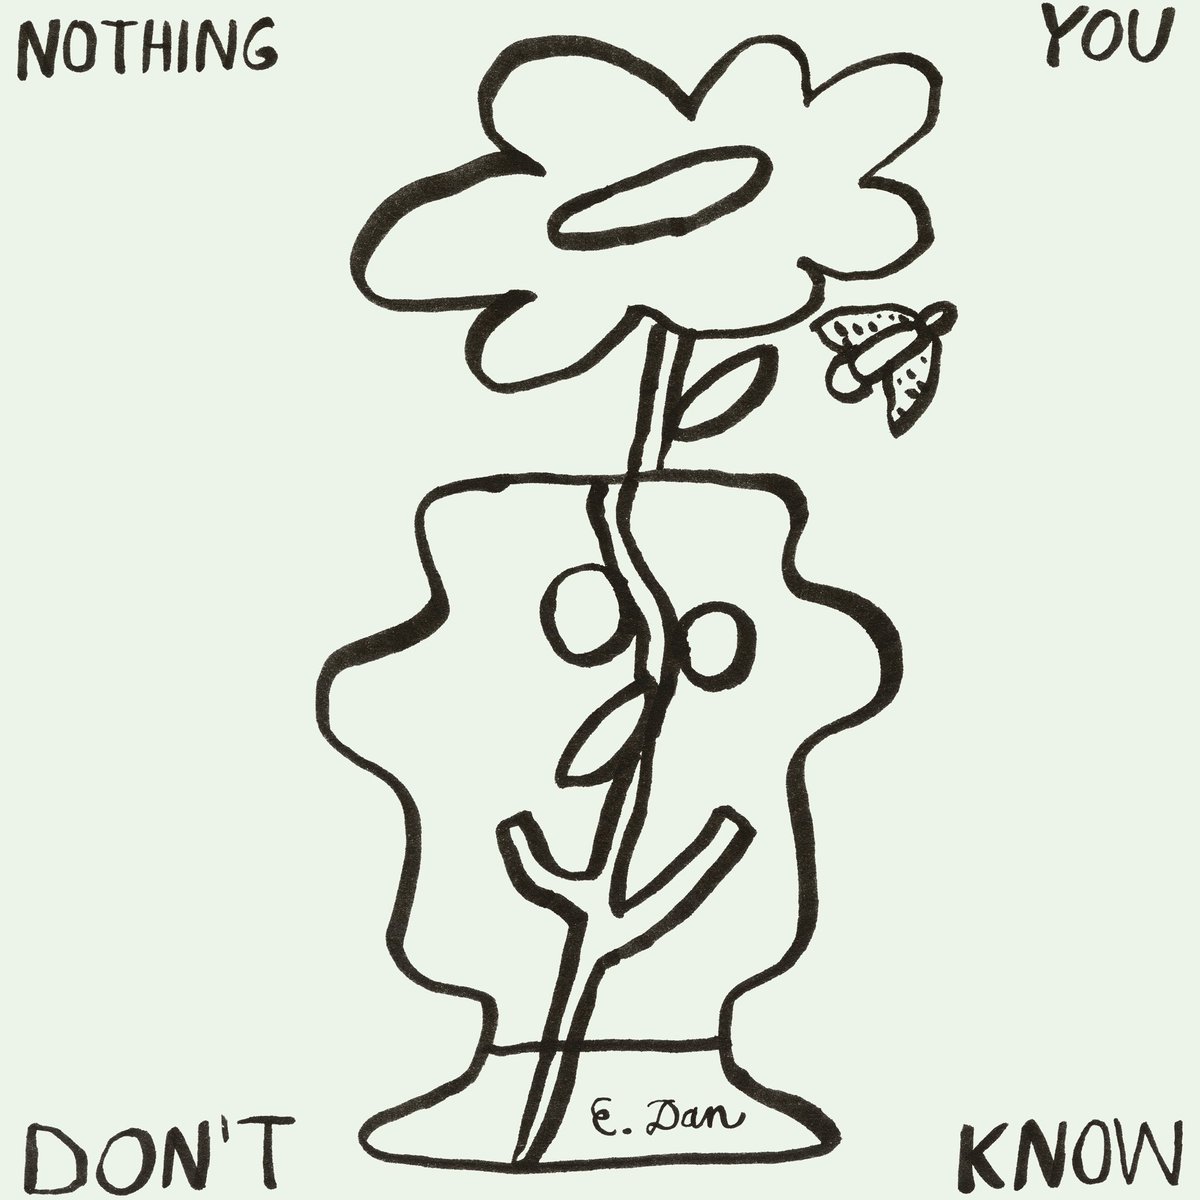 ID Labs ::Nothing You Don’t Know:: An instrumental album by E. Dan Remember Music / Warner Records 4.26.24